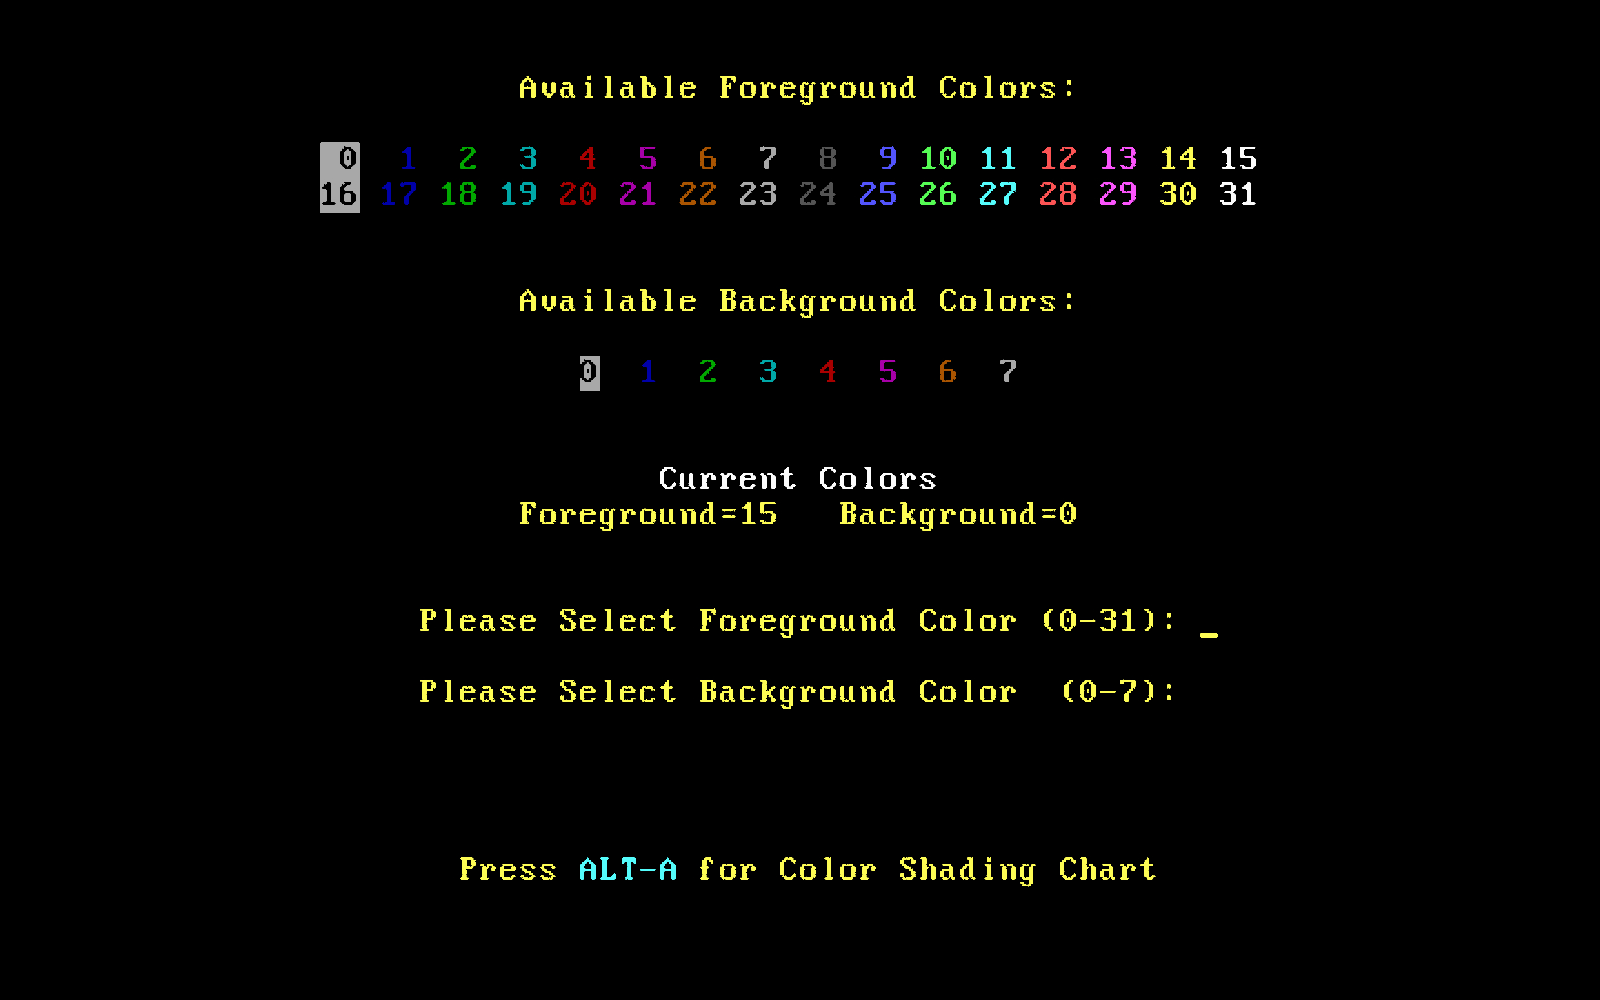 TheDraw color selection screen